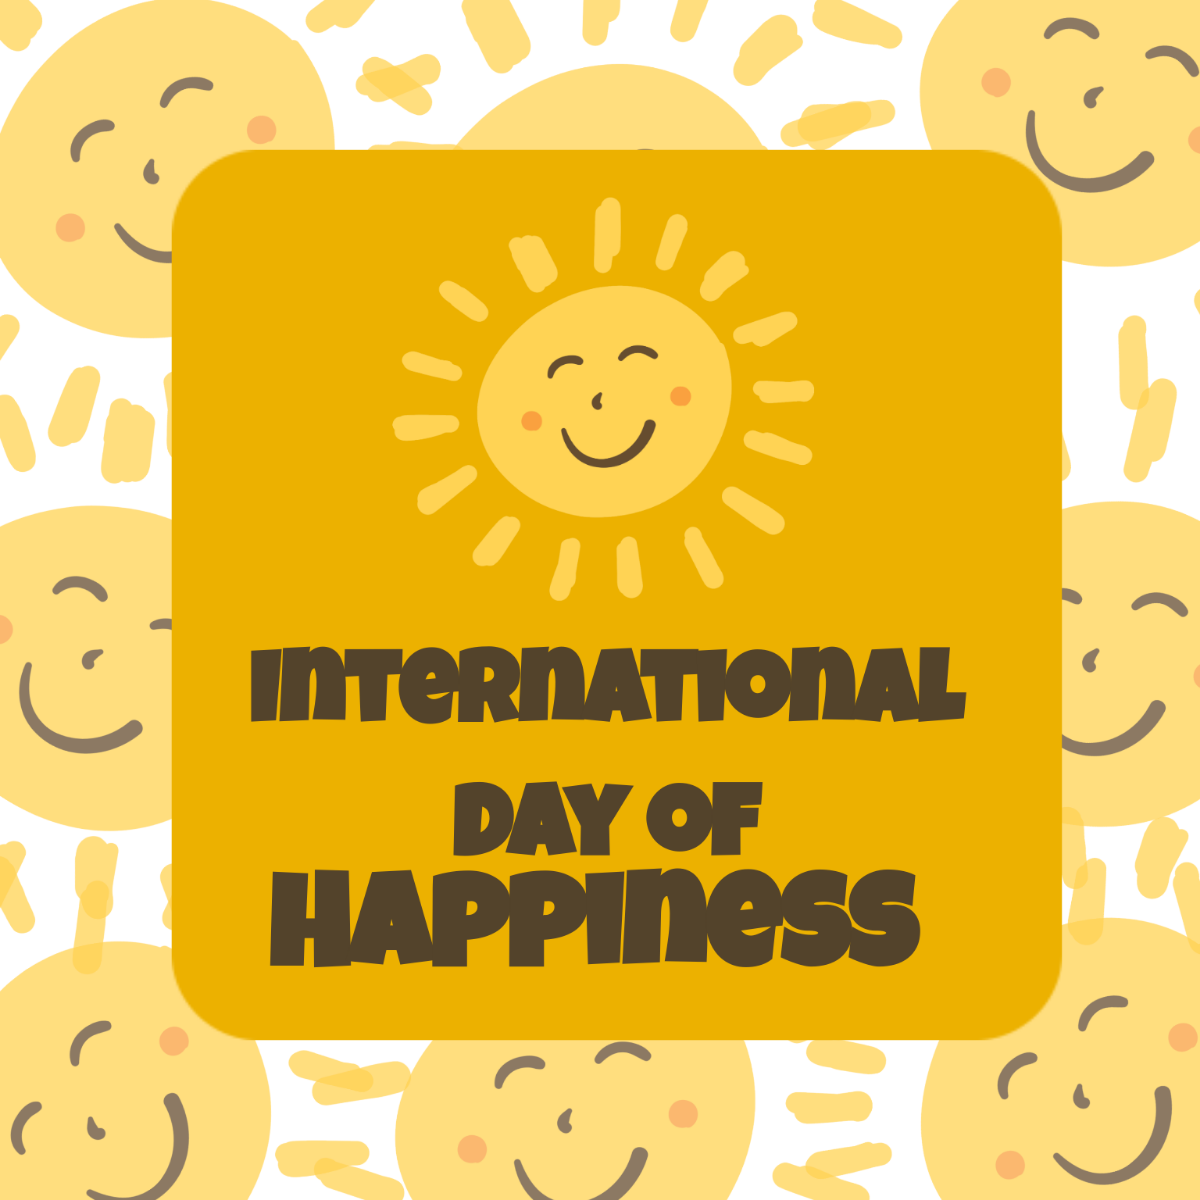 Free International Day of Happiness Poster Vector Template